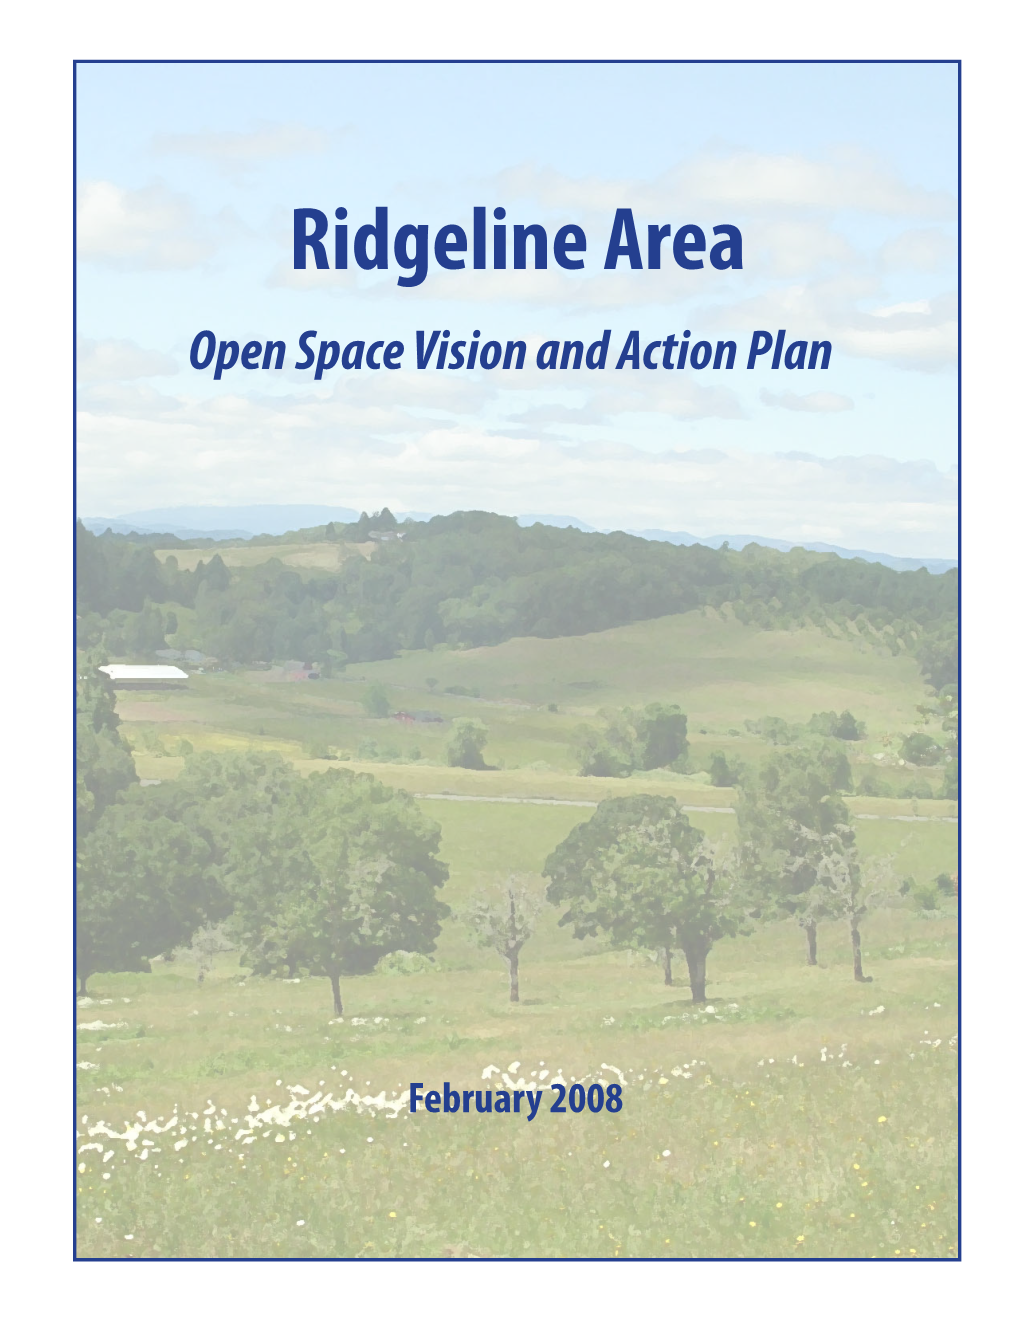 Ridgeline Area Open Space Vision and Action Plan